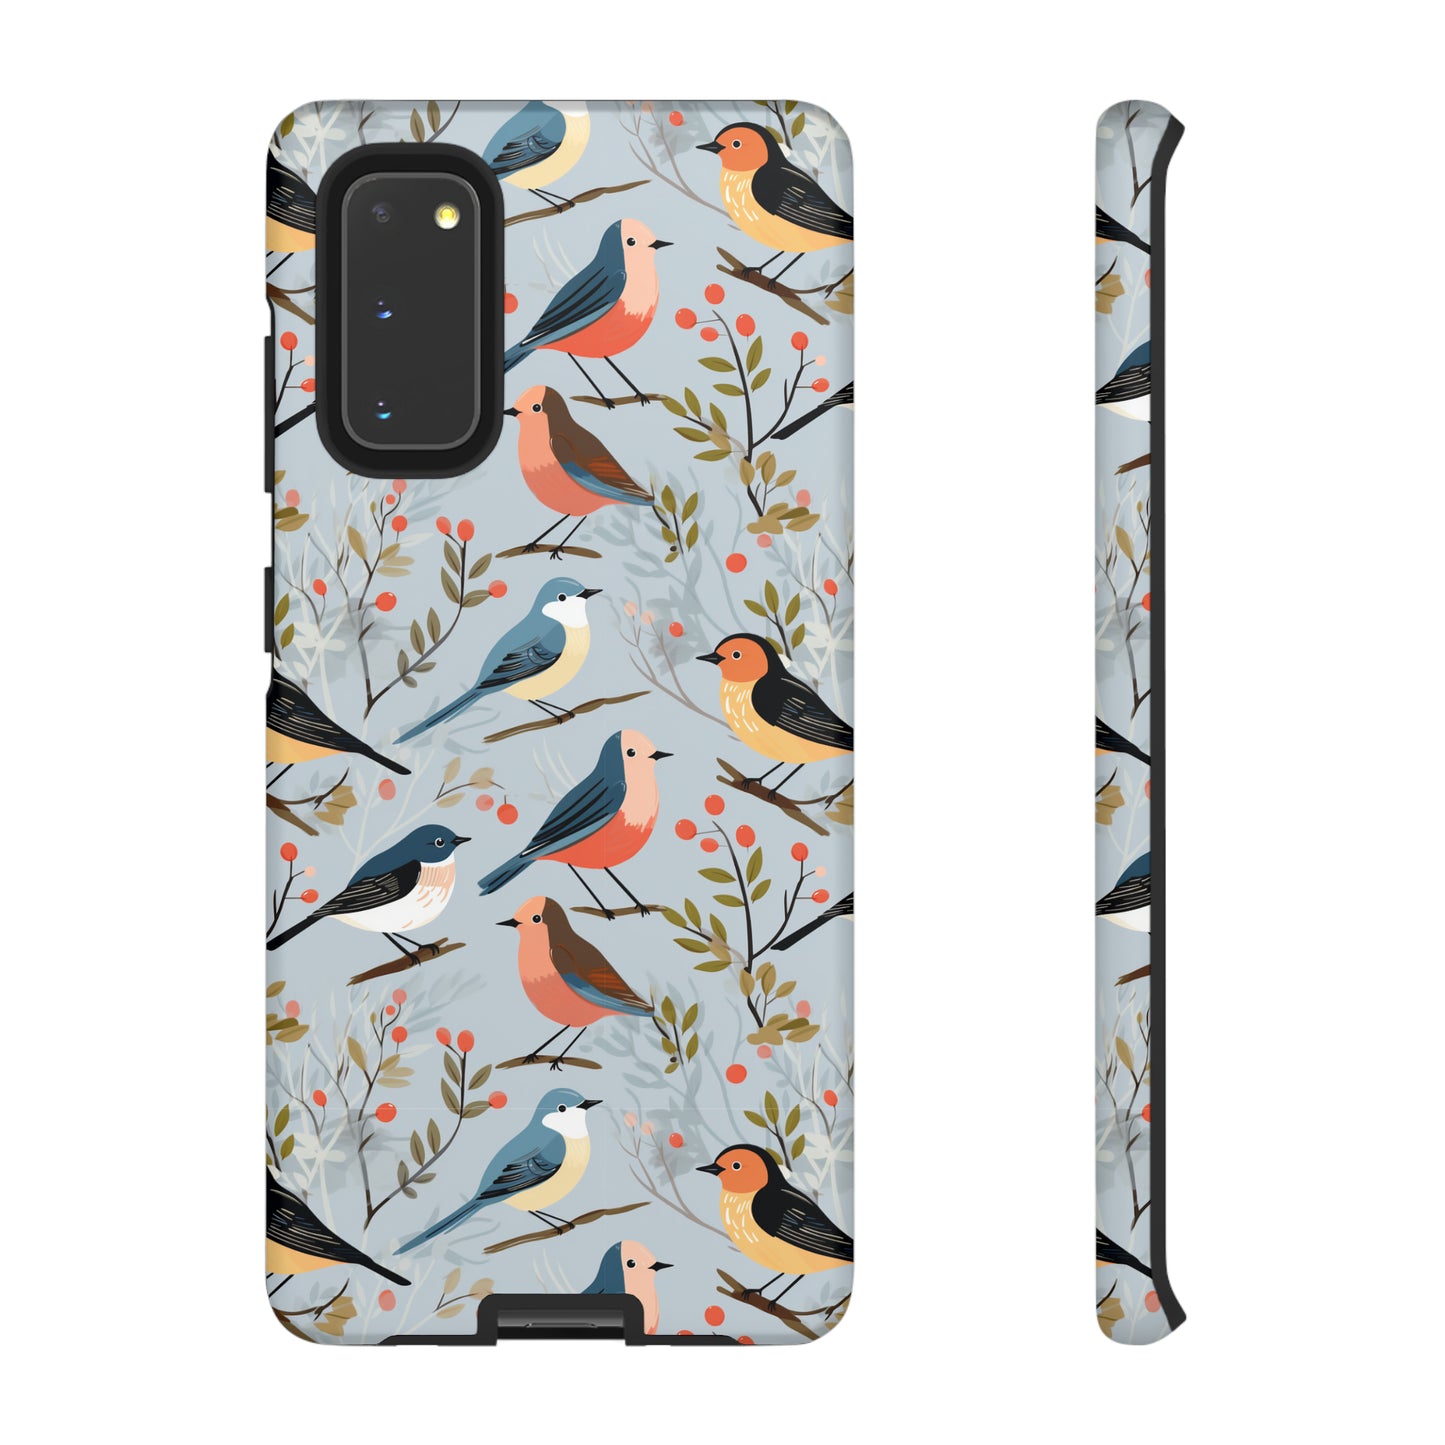 Song Bird Phone Case - Protective Cover for iPhone, Samsung Galaxy, Google Pixel - Glossy/Matte Finish - Tough Cases - Bird Lover Gift